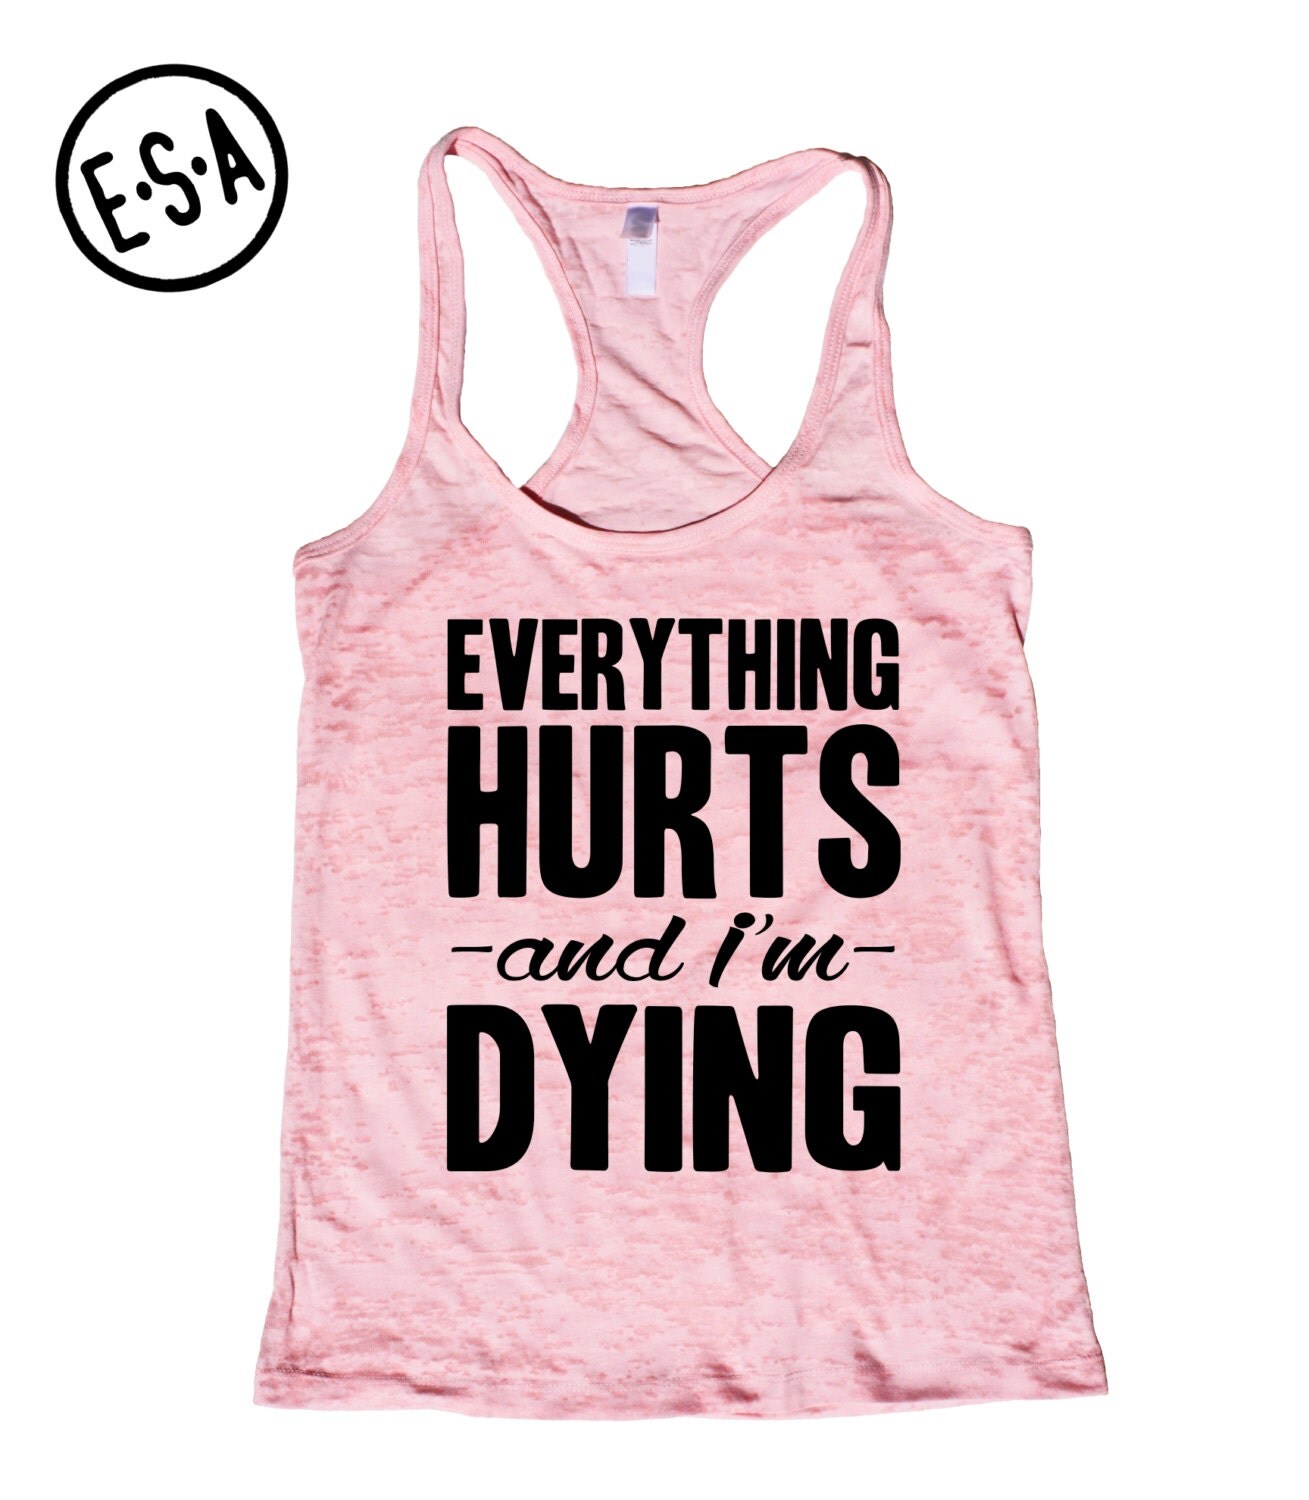 Everything Hurts And I'm Dying. Workout Tank. by EnlightenedState